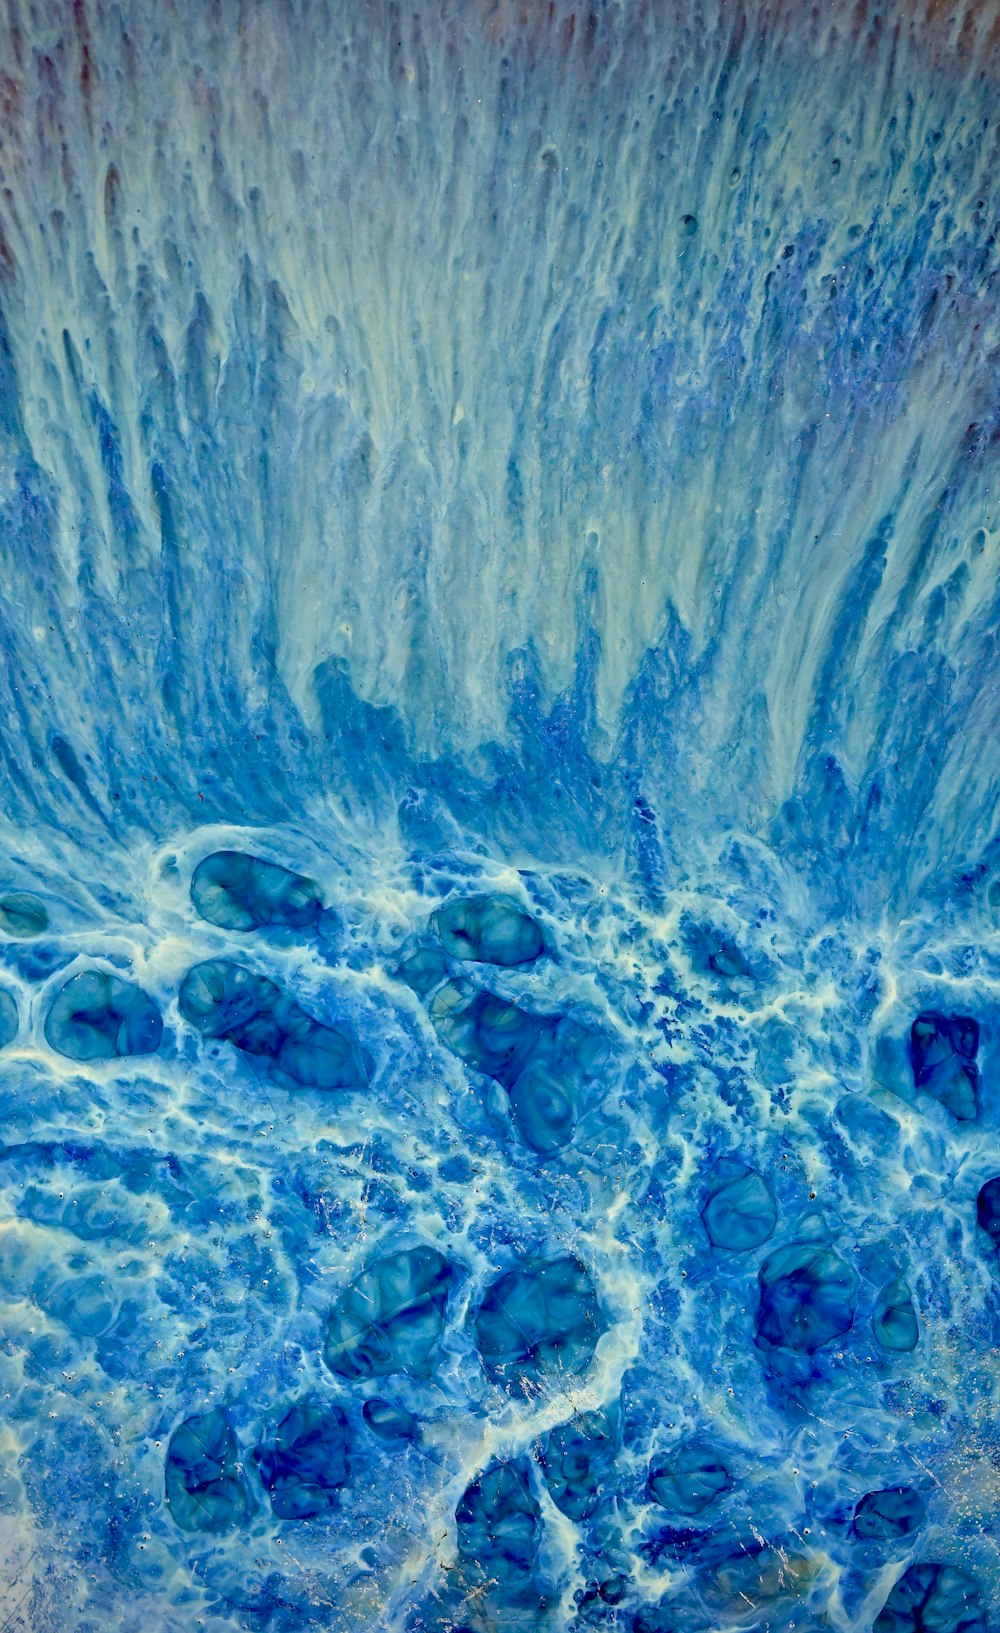 a close up view of a blue ocean wave